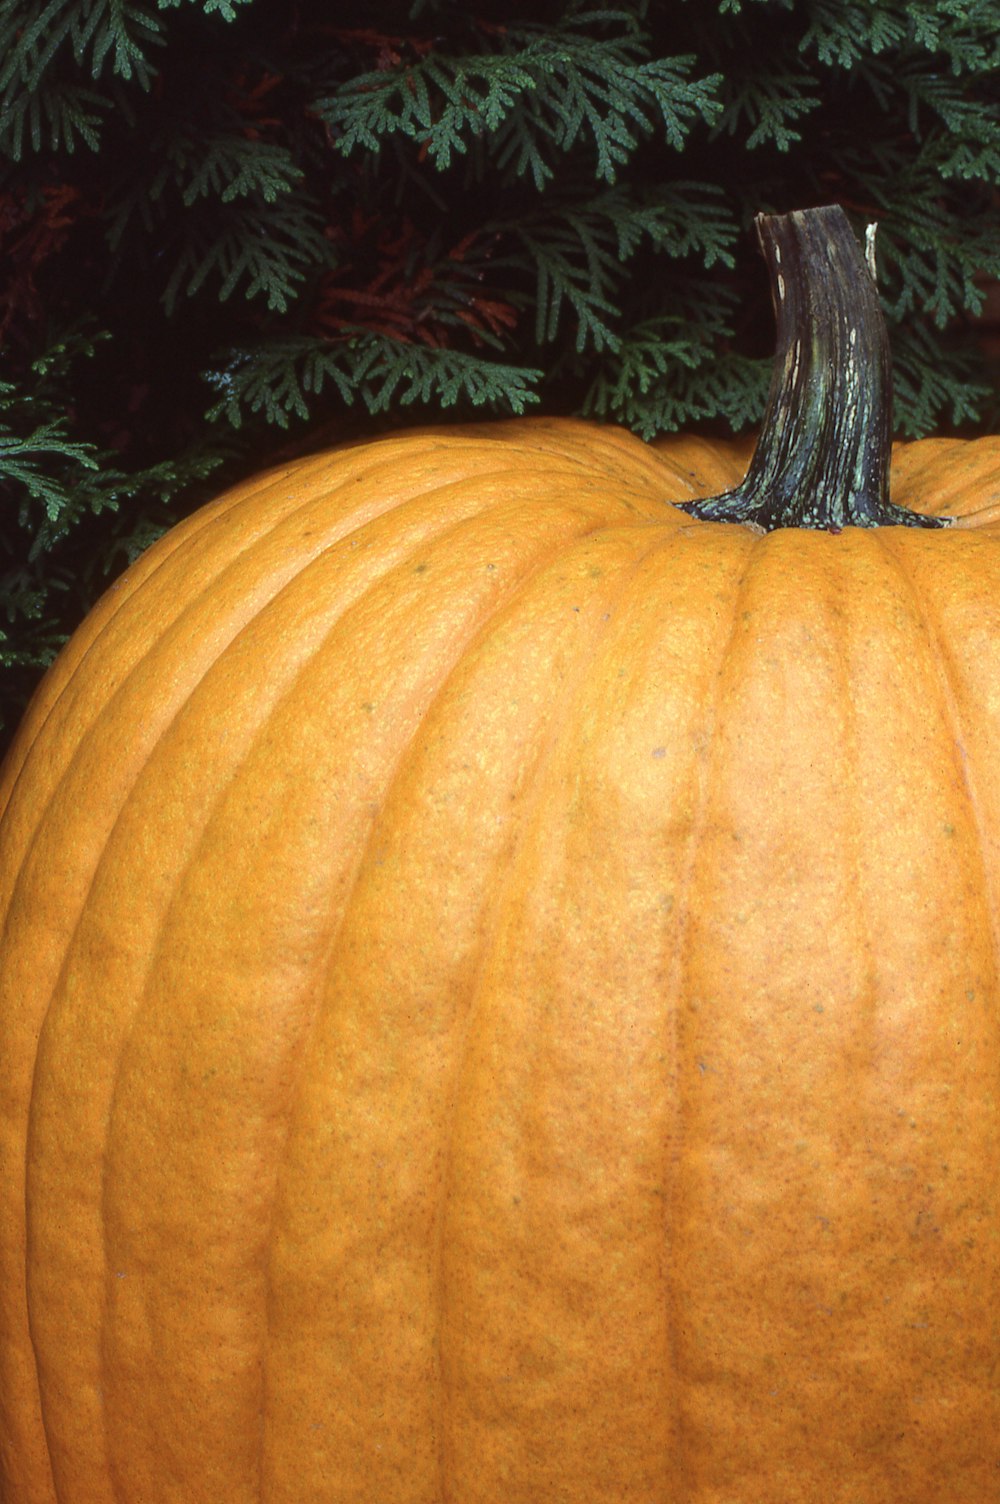 a large orange pumpkin sitting in front of a tree